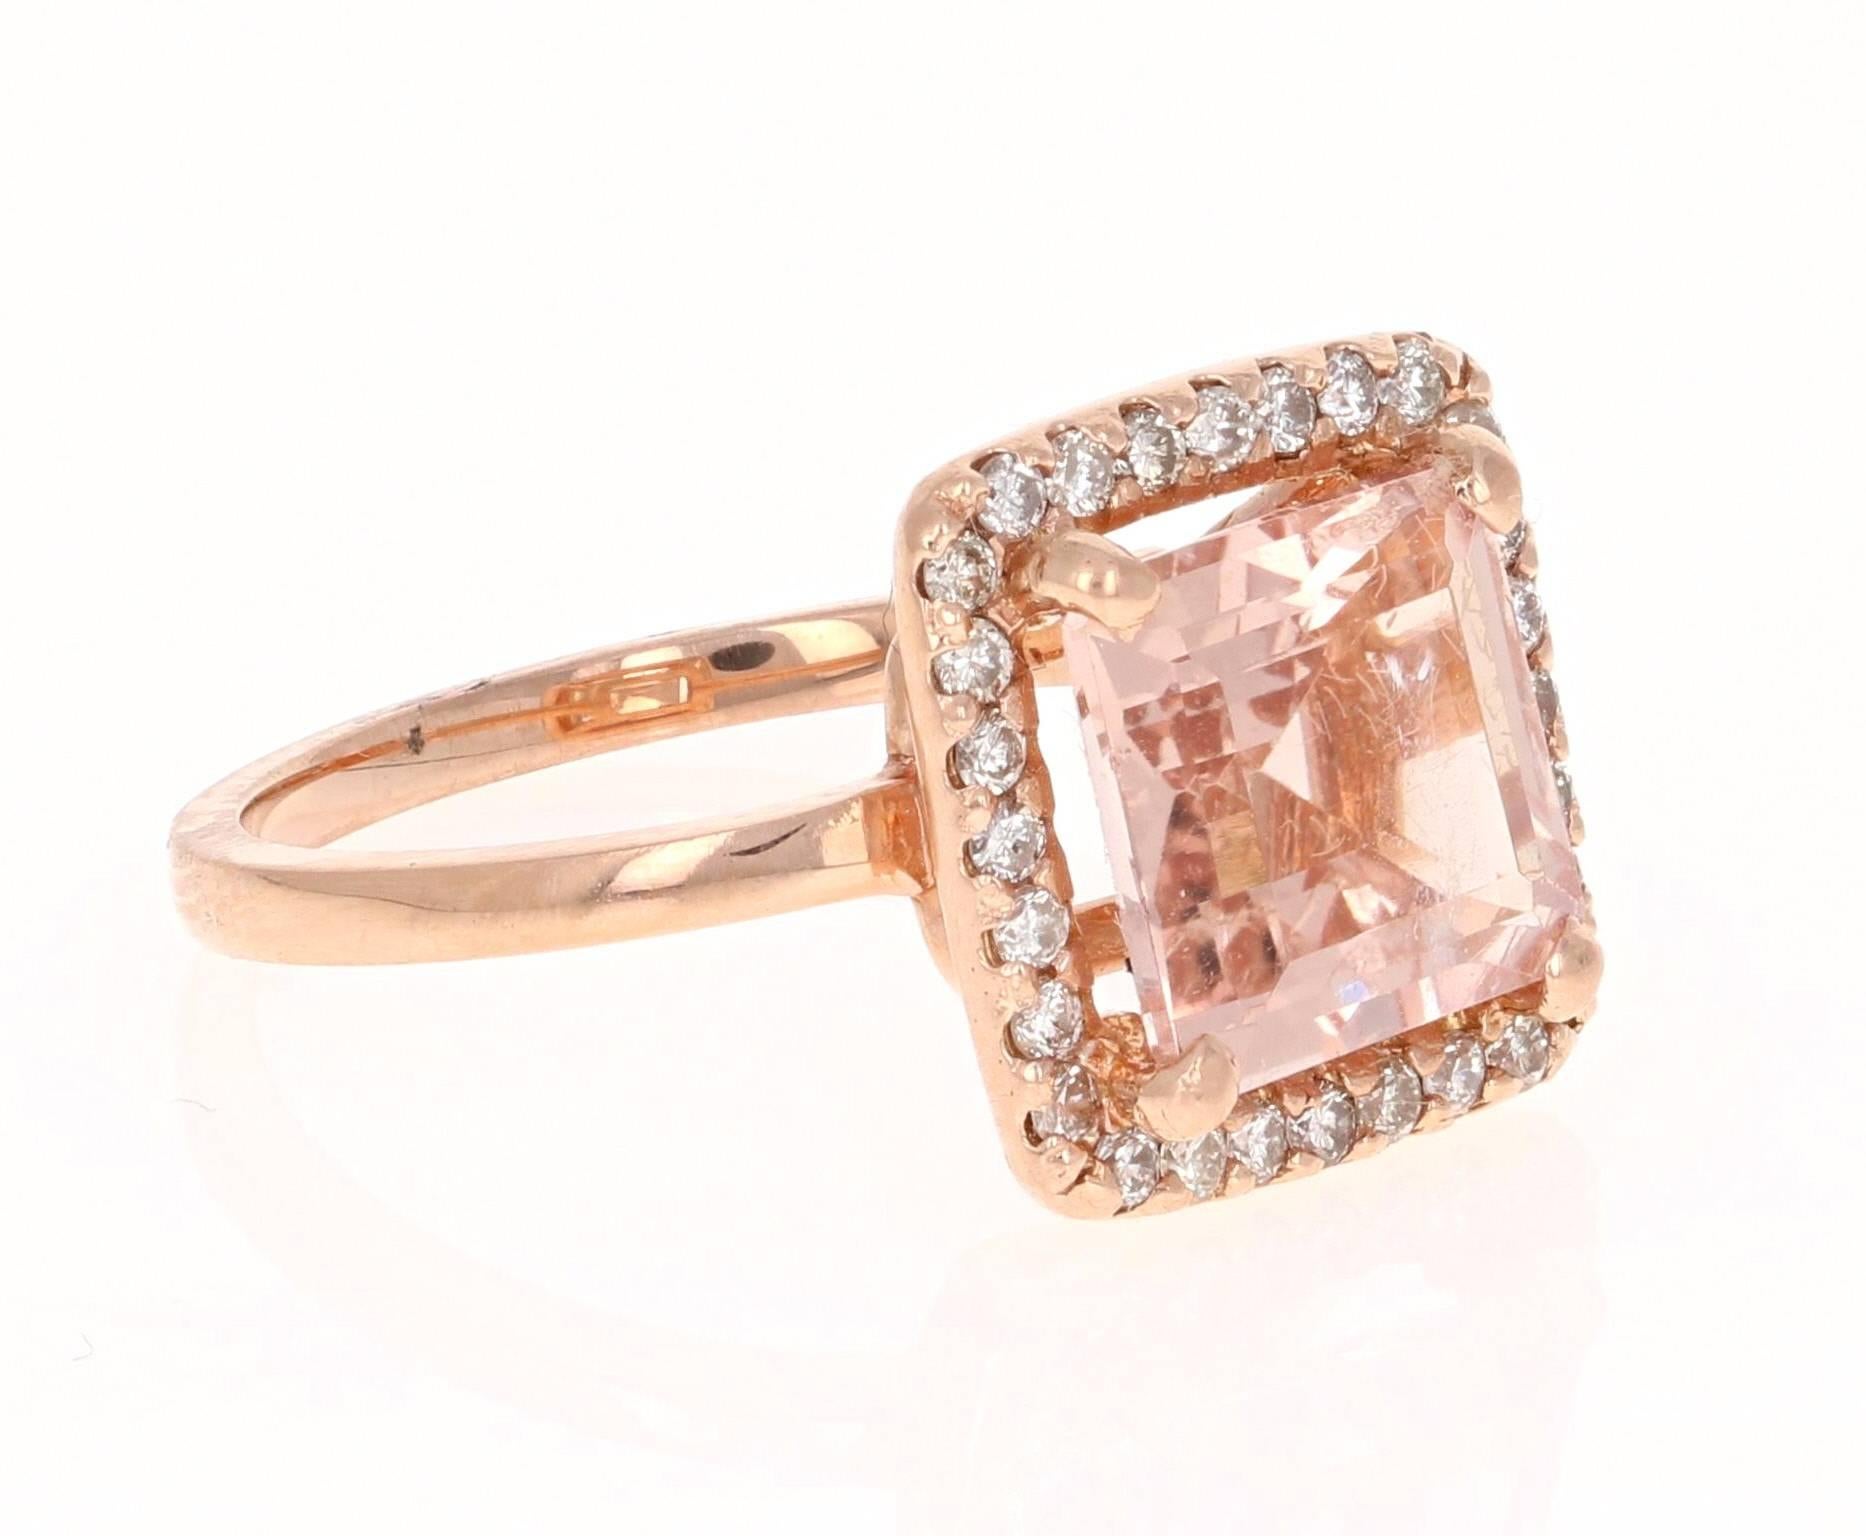 A gorgeous modern setting! This ring has a 3.58 carat Square Cut Morganite in the center of the ring and is surrounded by 28 Round Cut Diamonds that weigh 0.38 carats. The ring is casted in 14K Rose gold and weighs approximately 4.5 grams.. It is a